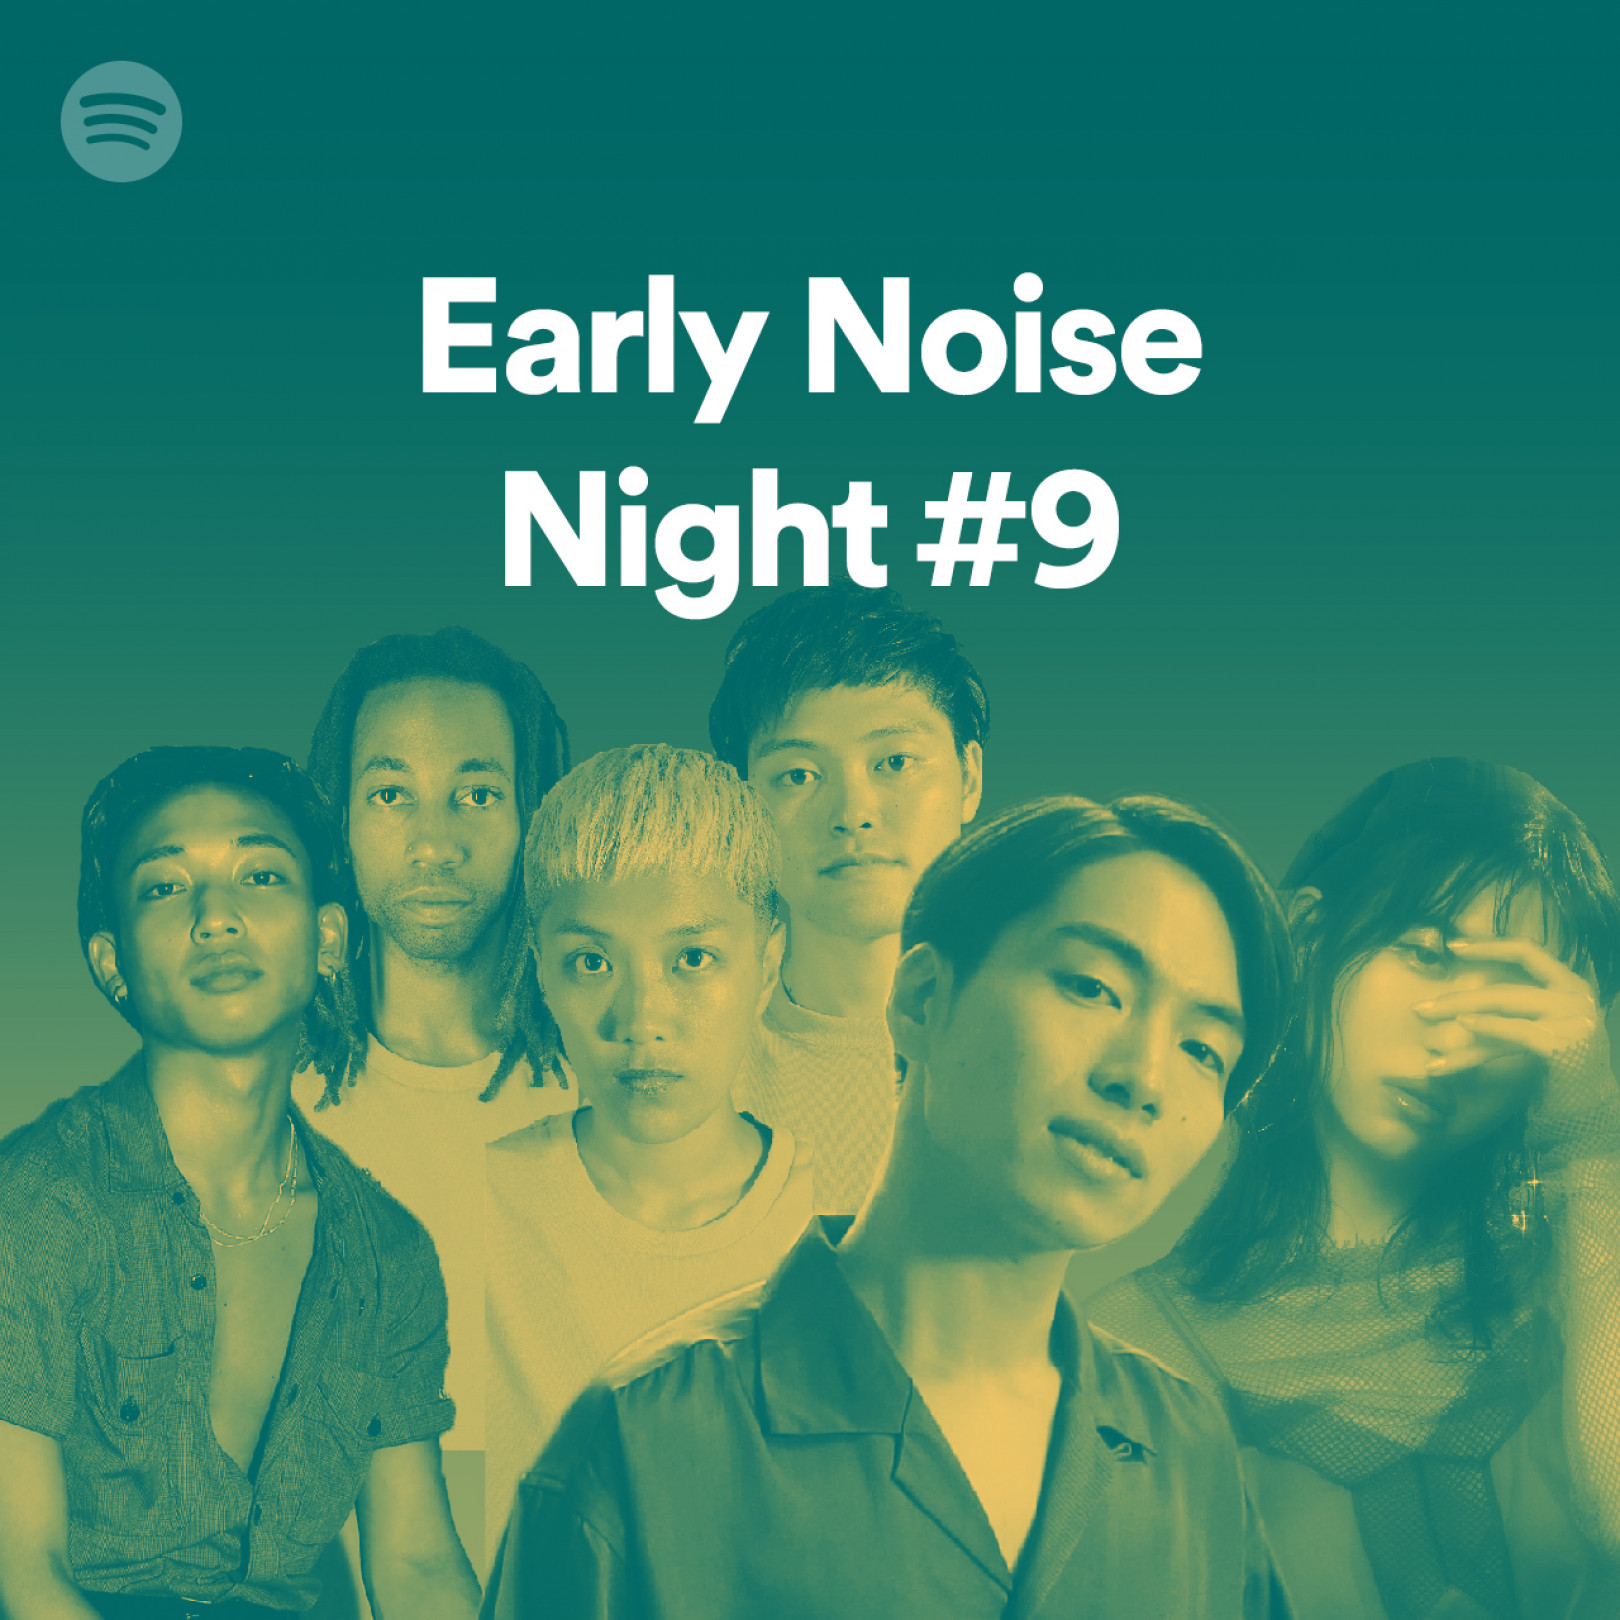 「Early Noise Night #9」